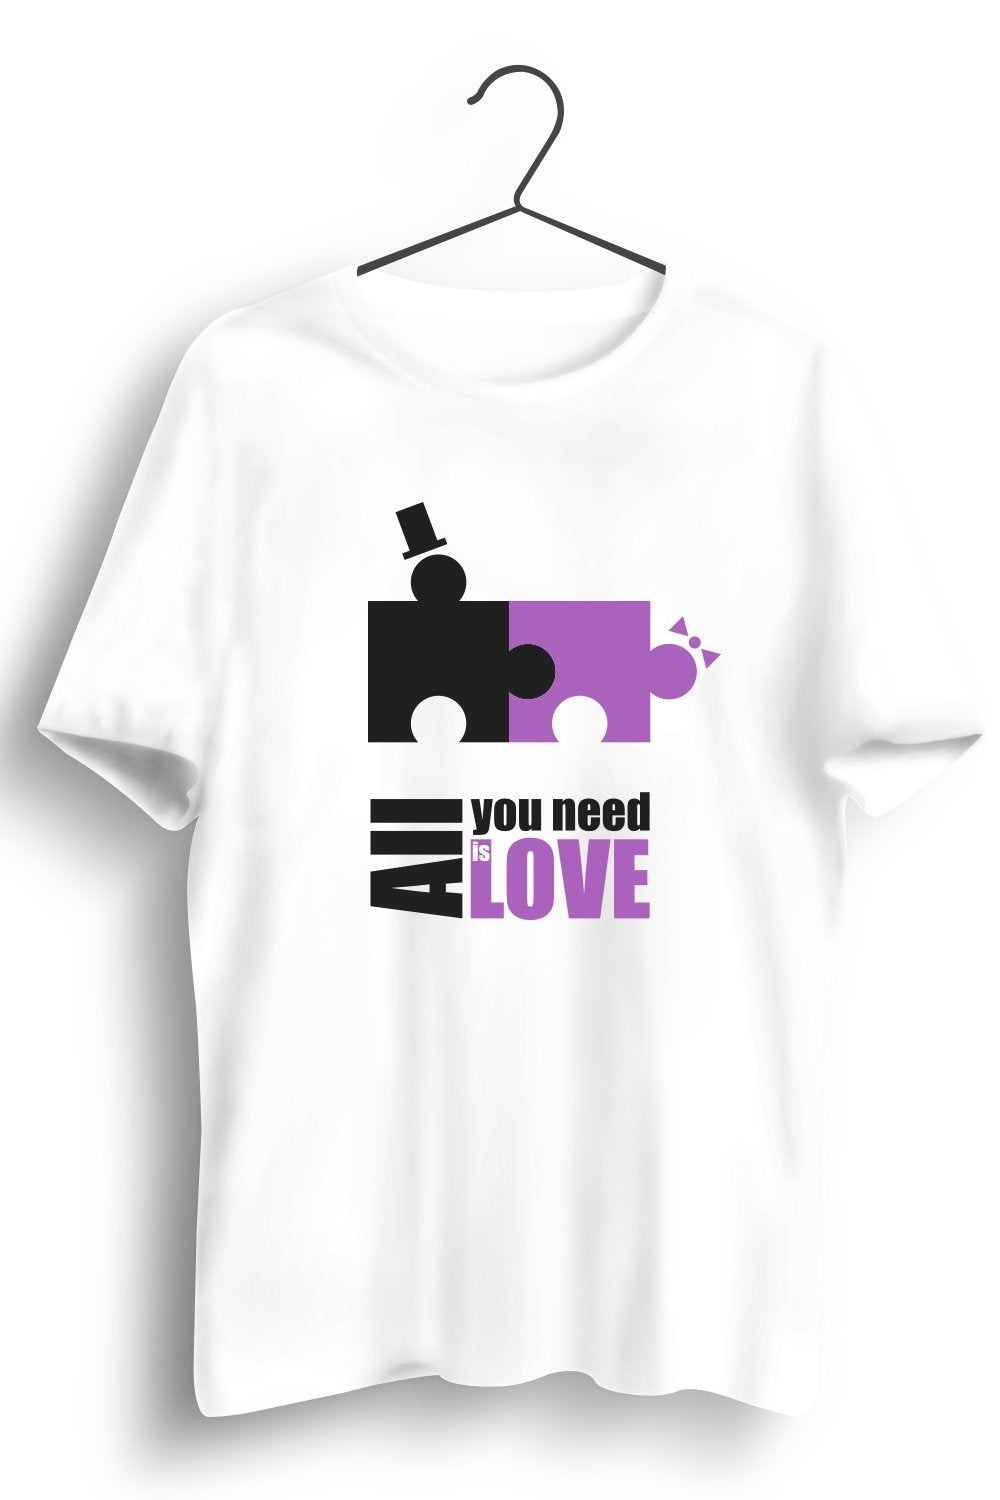 All You Need Is Love Graphic Printed White Tshirt